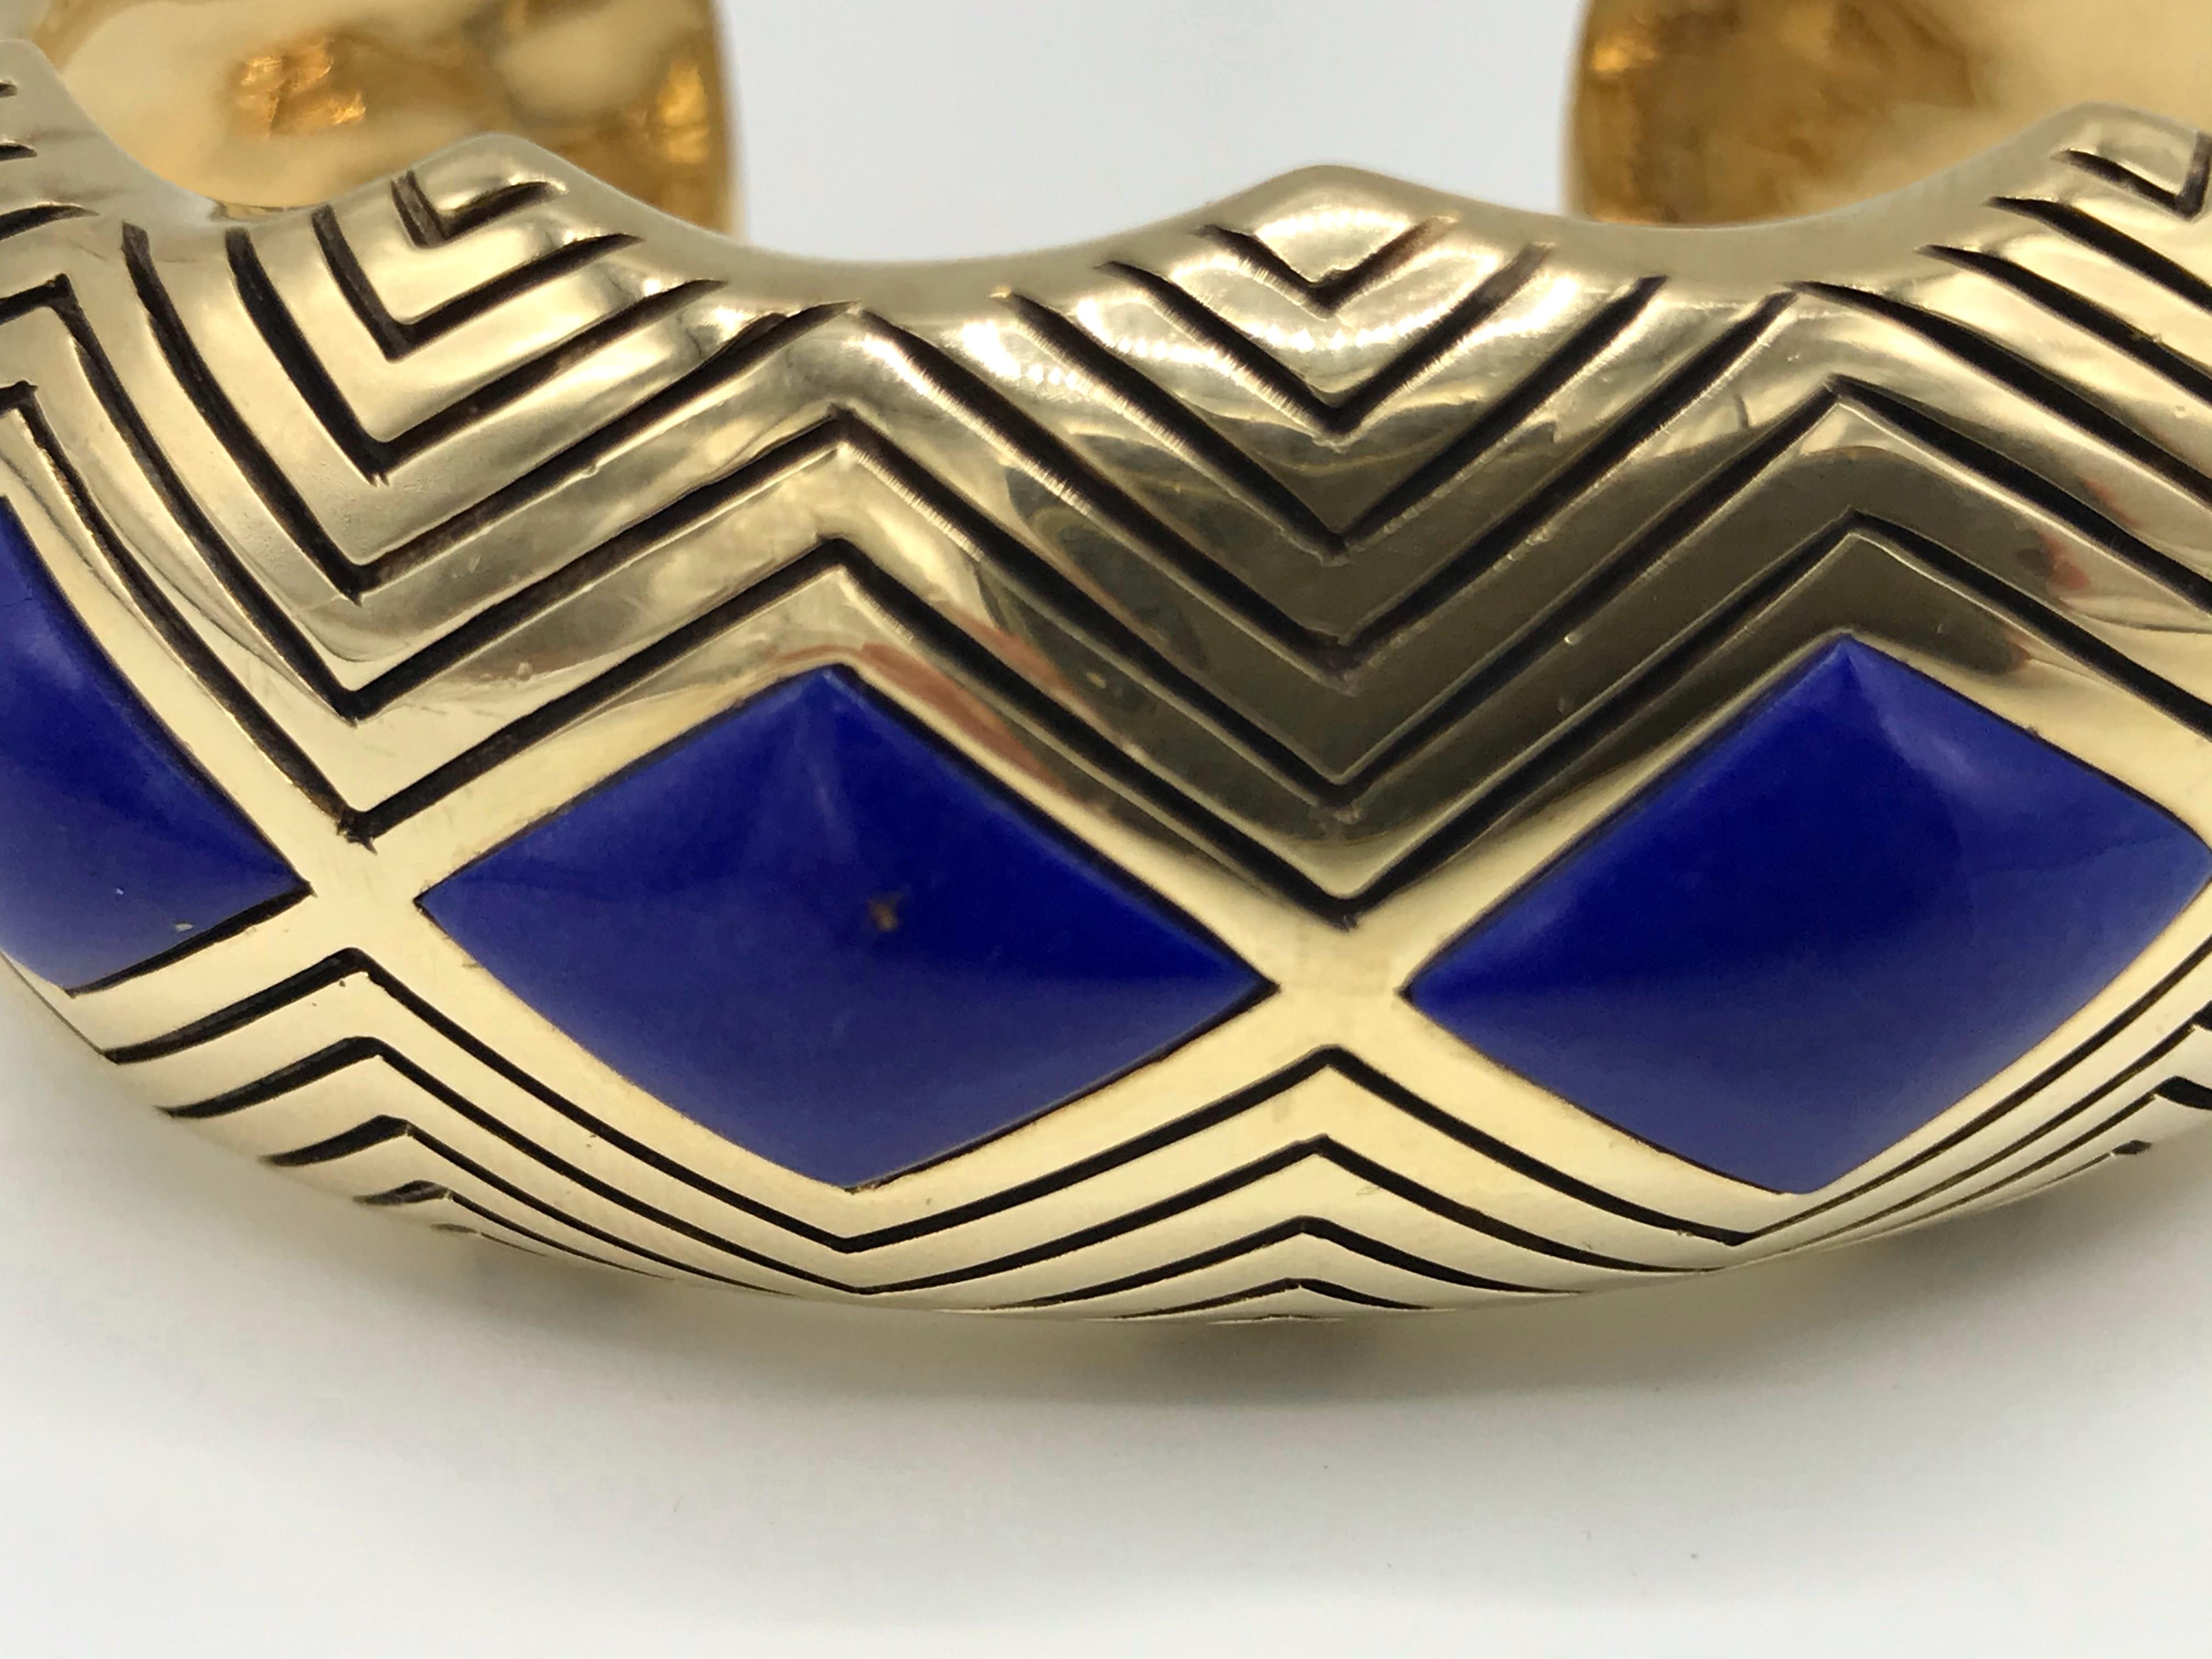 Vintage (c.1980s) chunky bracelet made of 14k textured yellow gold and lapis lazuli by Hammerman Brothers.
Stamped with a hallmark for 14k gold and the Hammerman Brothers maker's mark.
Measurements: 6.5